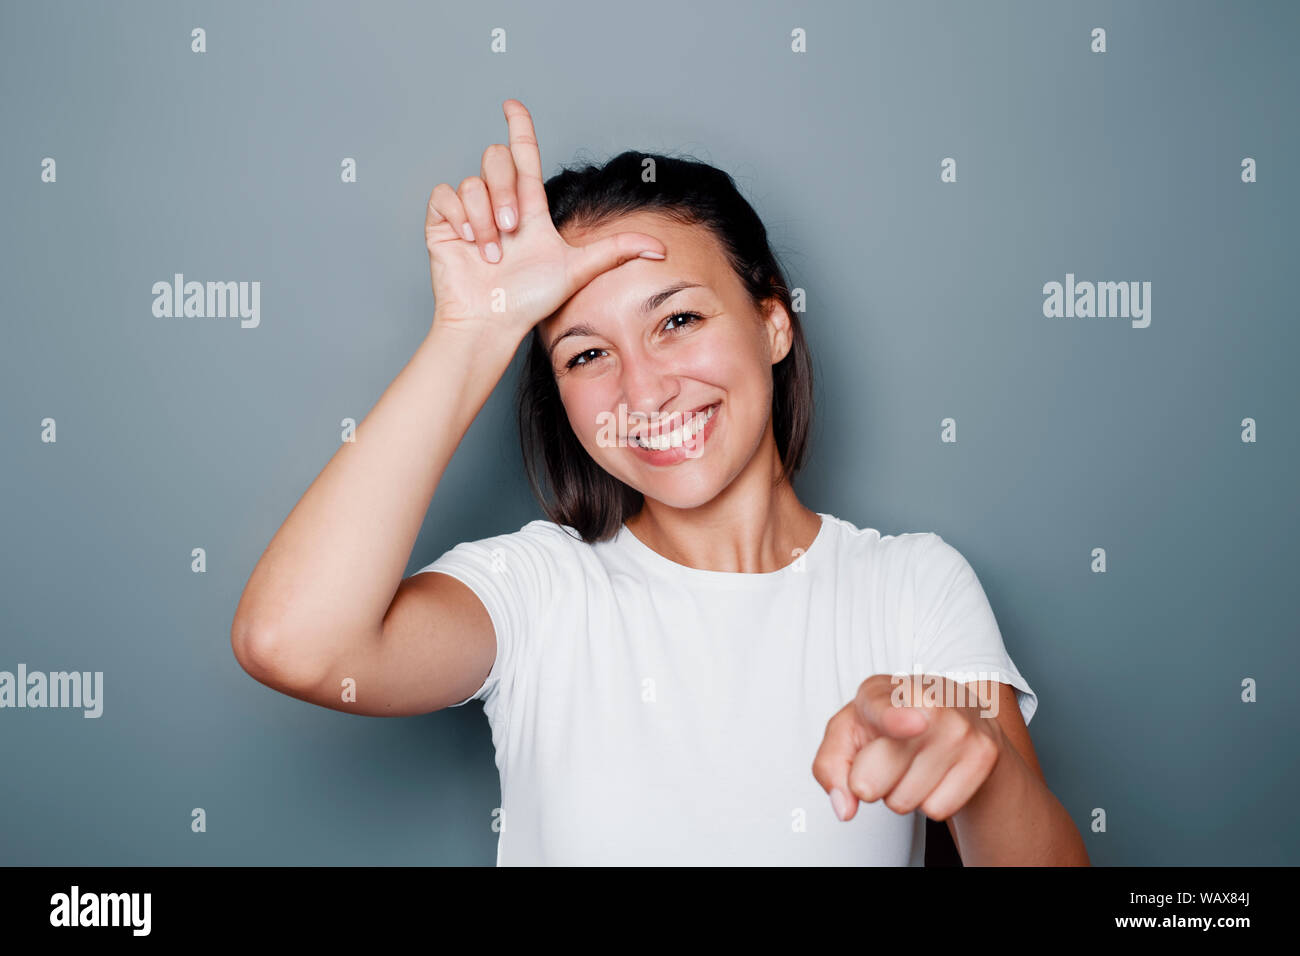 Funny woman making fun of someone with loser hand gesturing Stock Photo